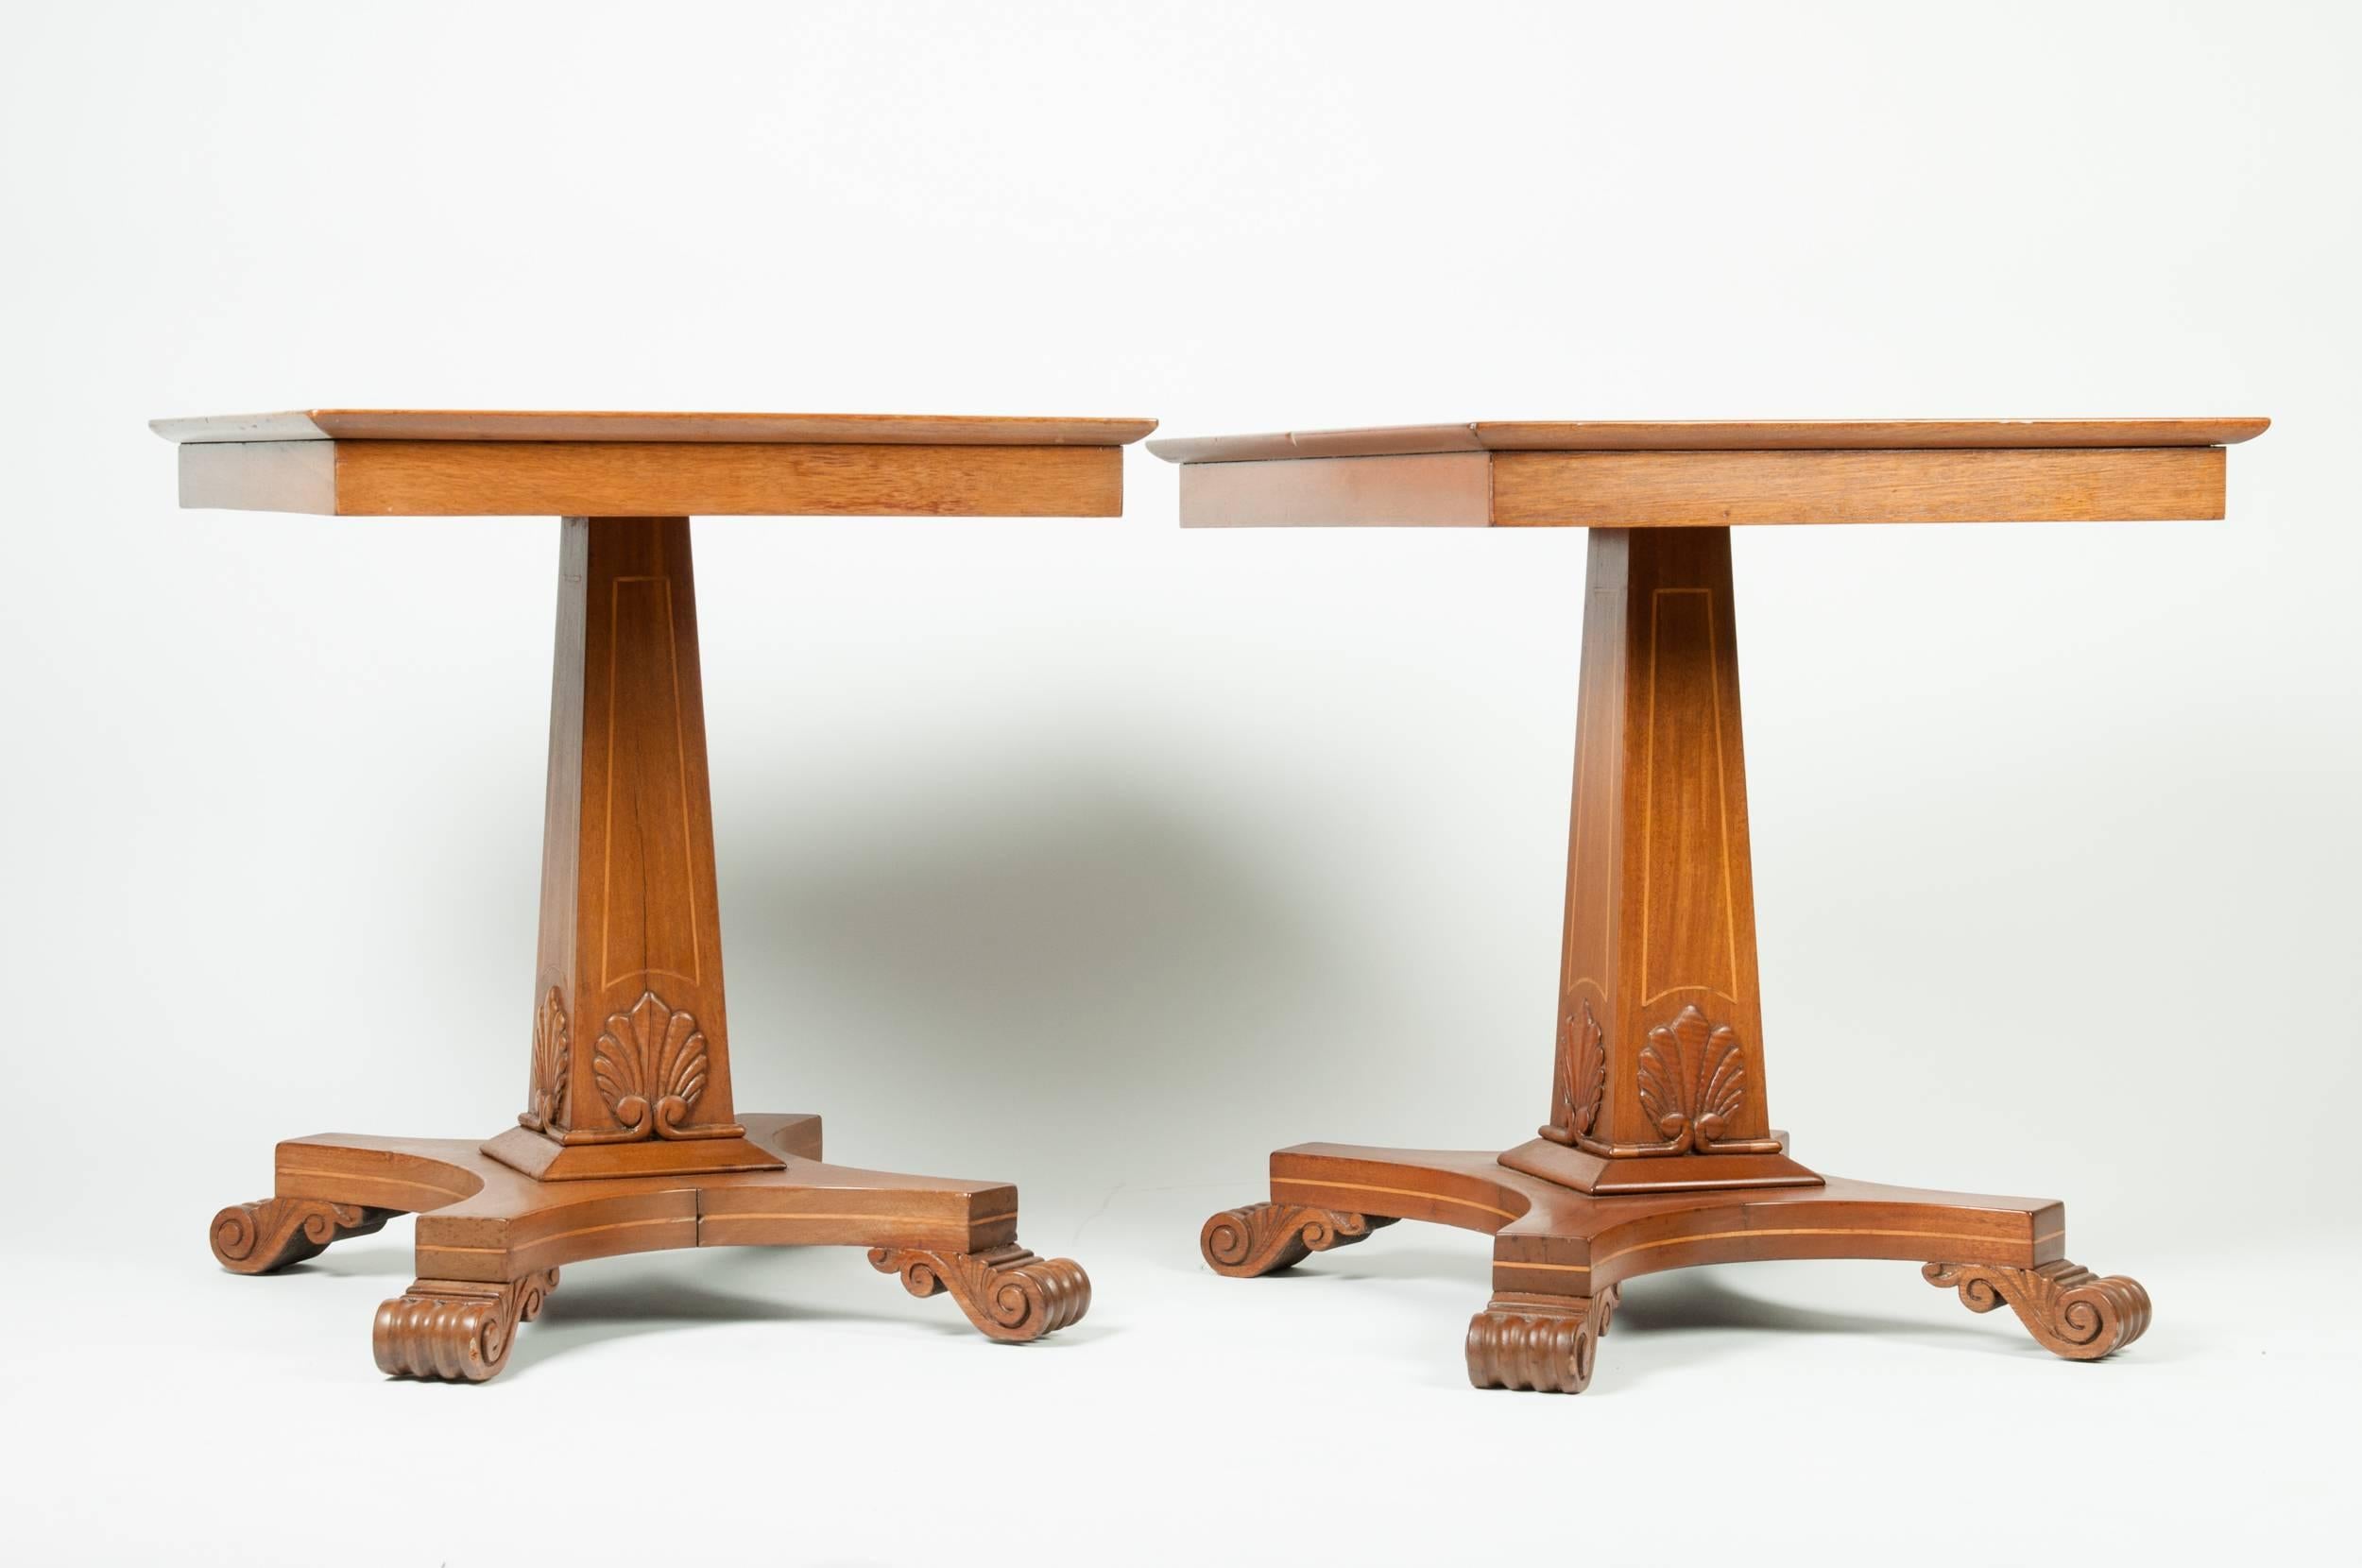 An antique pair of square light mahogany wood end or side tables. Each table is in great sturdy  antique condition with minor wear consistent to age / use . Each side table measure 28 inches long x 23 inches width x 26 inches high.